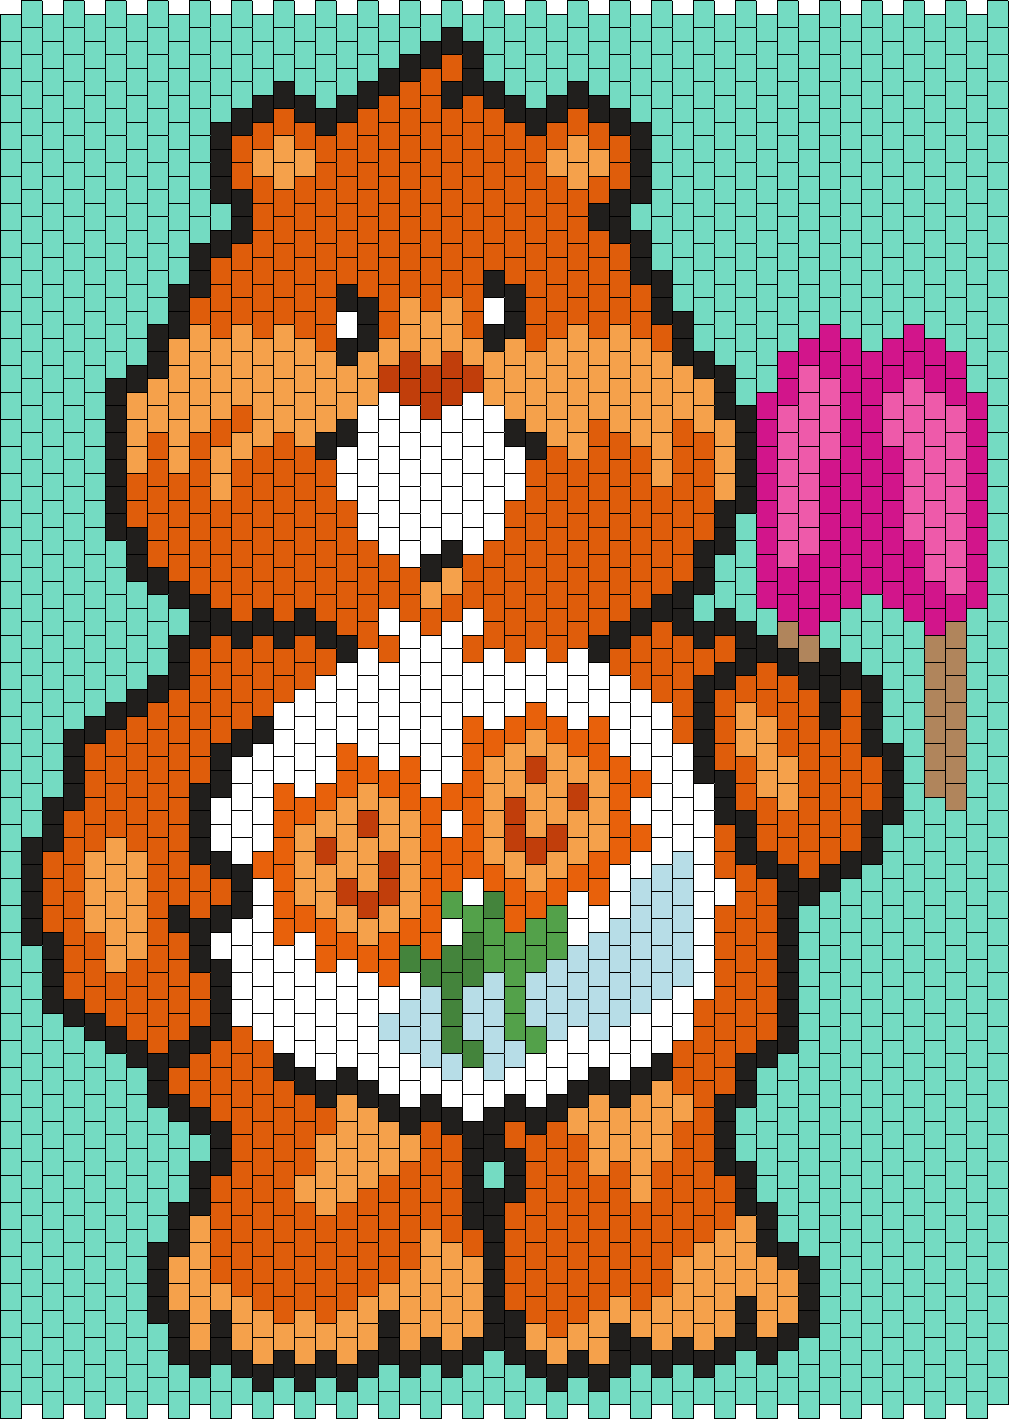 Friend Bear From The Care Bears